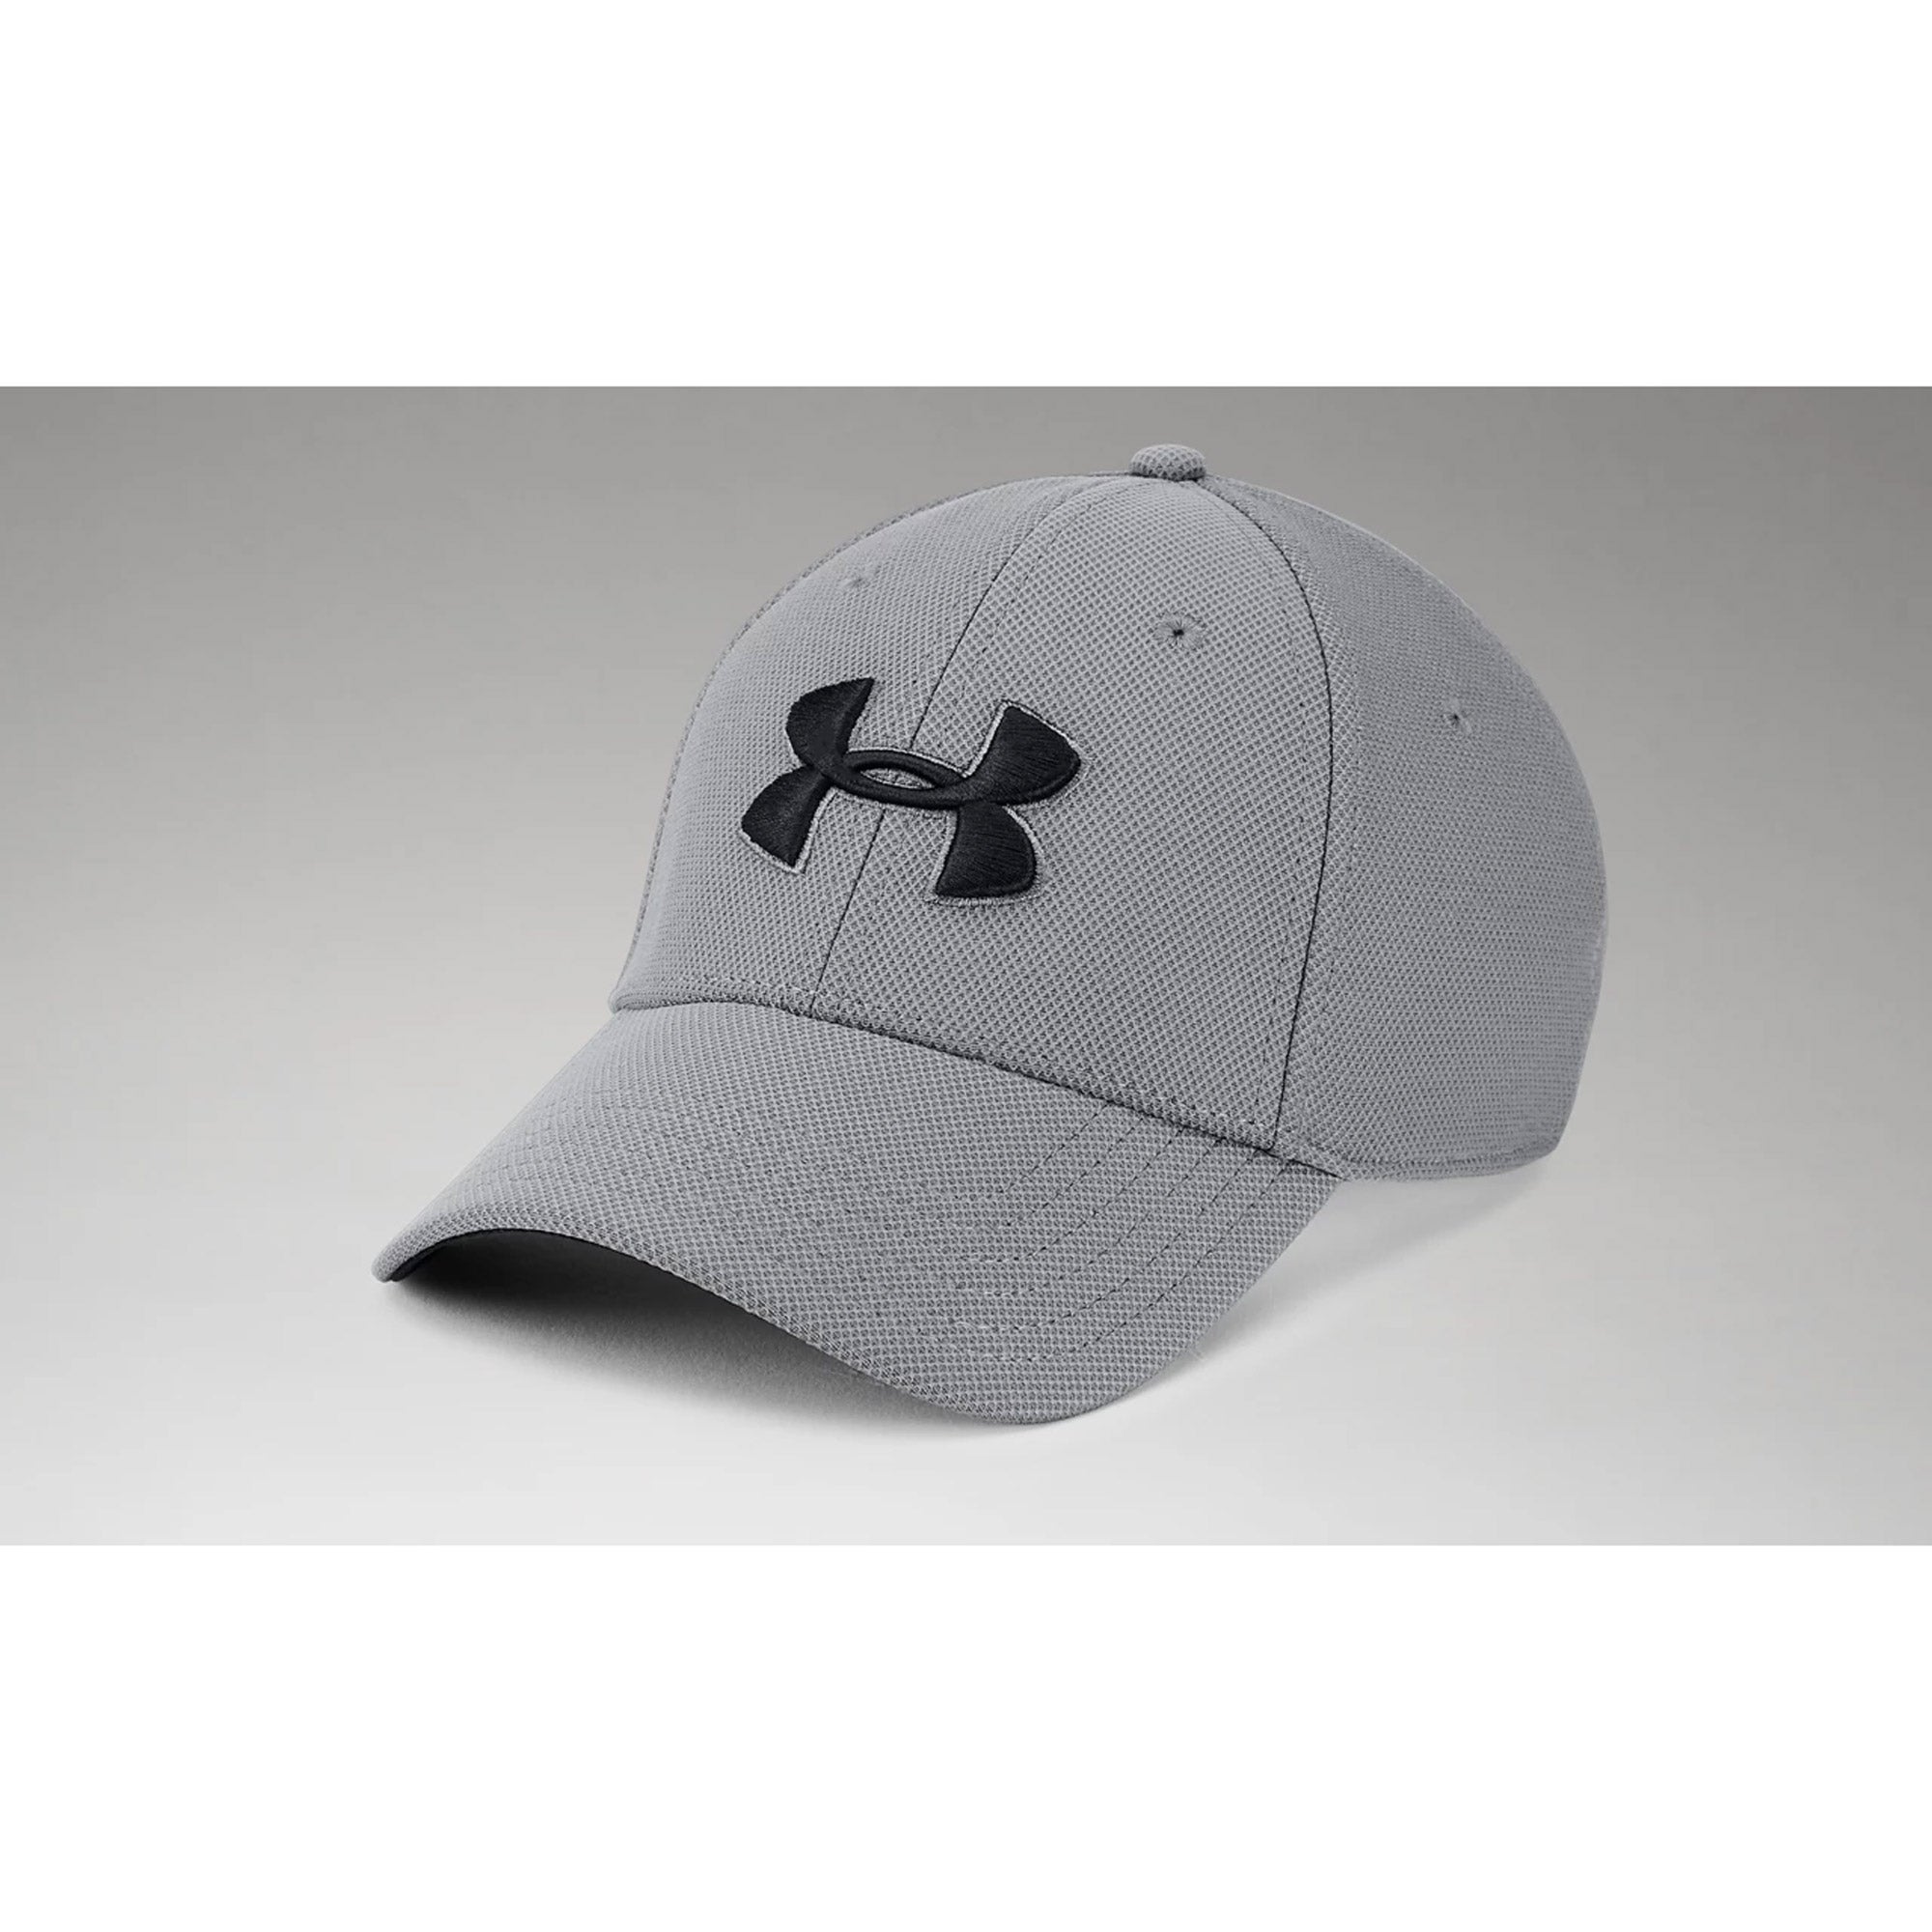 Under Armour 1305036-040 UA Blitzing 3.0 Ball Cap in Graphite with Black Logo Front